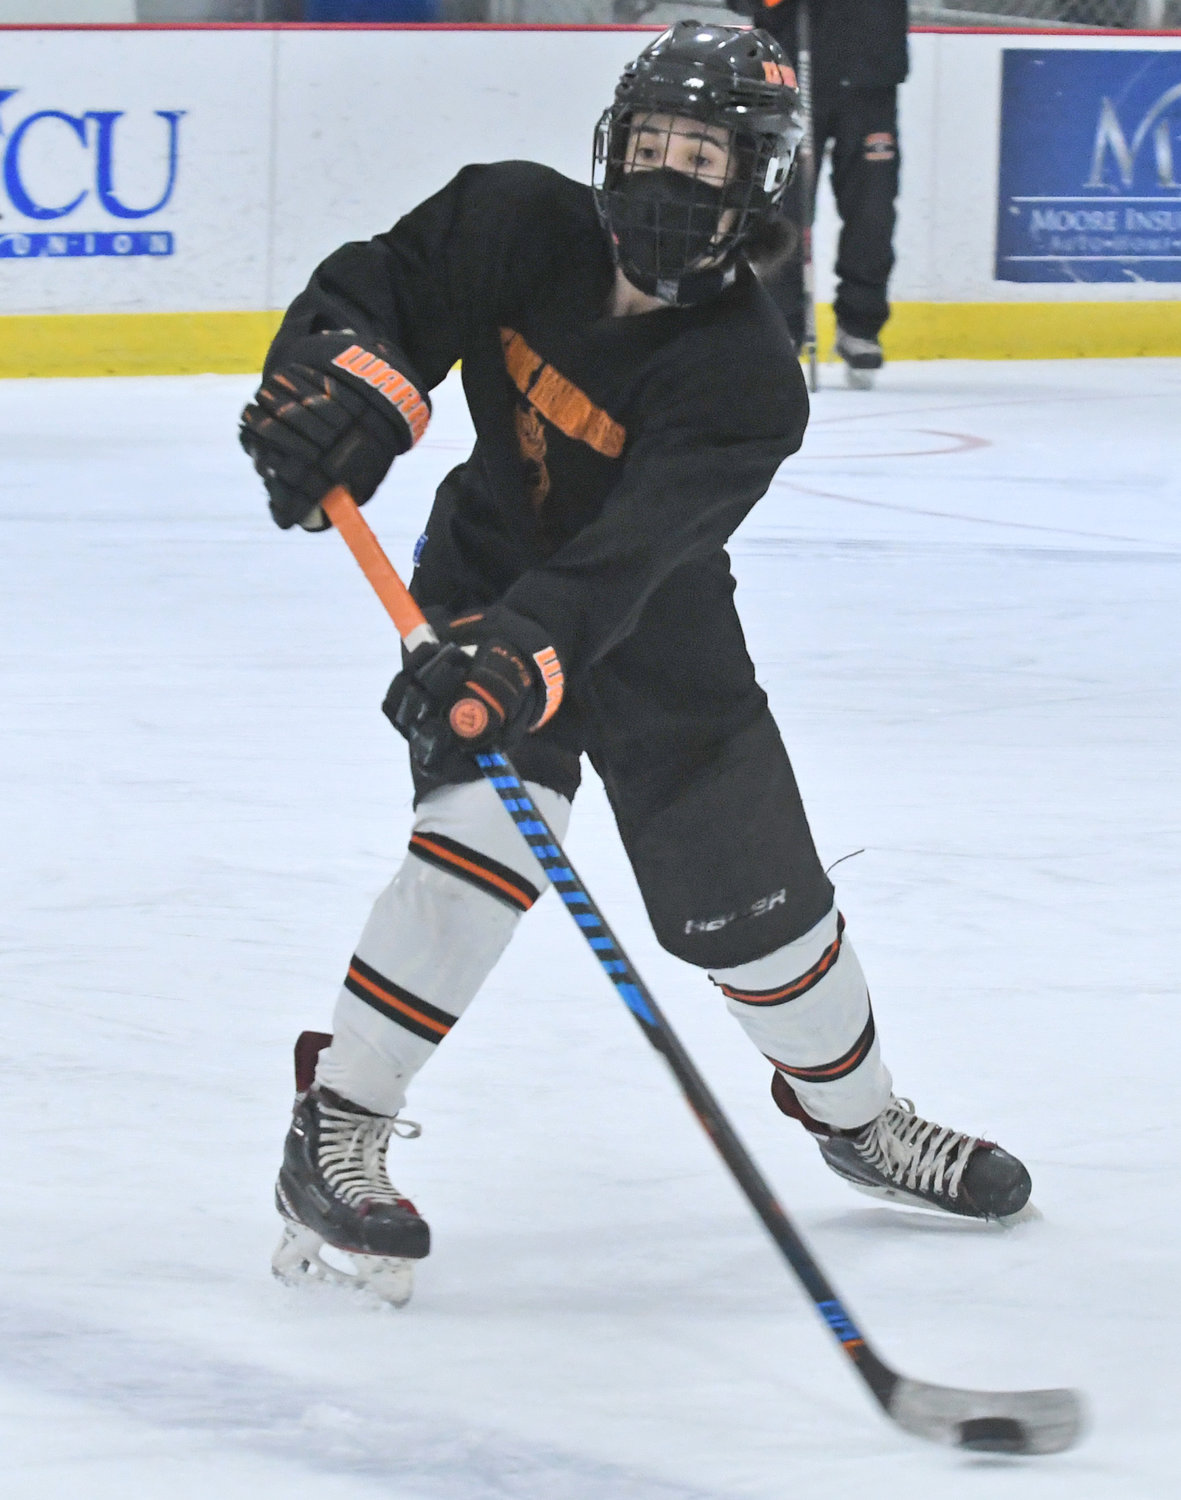 BACK ON THE ICE — Rome Free Academy senior defenseman Jared Hussey makes a pass during practice at Kennedy Arena Monday afternoon. It was the team's first practice as they await a decision from the school district and the county on whether hockey, a high-risk sport due to COVID-19, will be able to take place this winter in Rome.